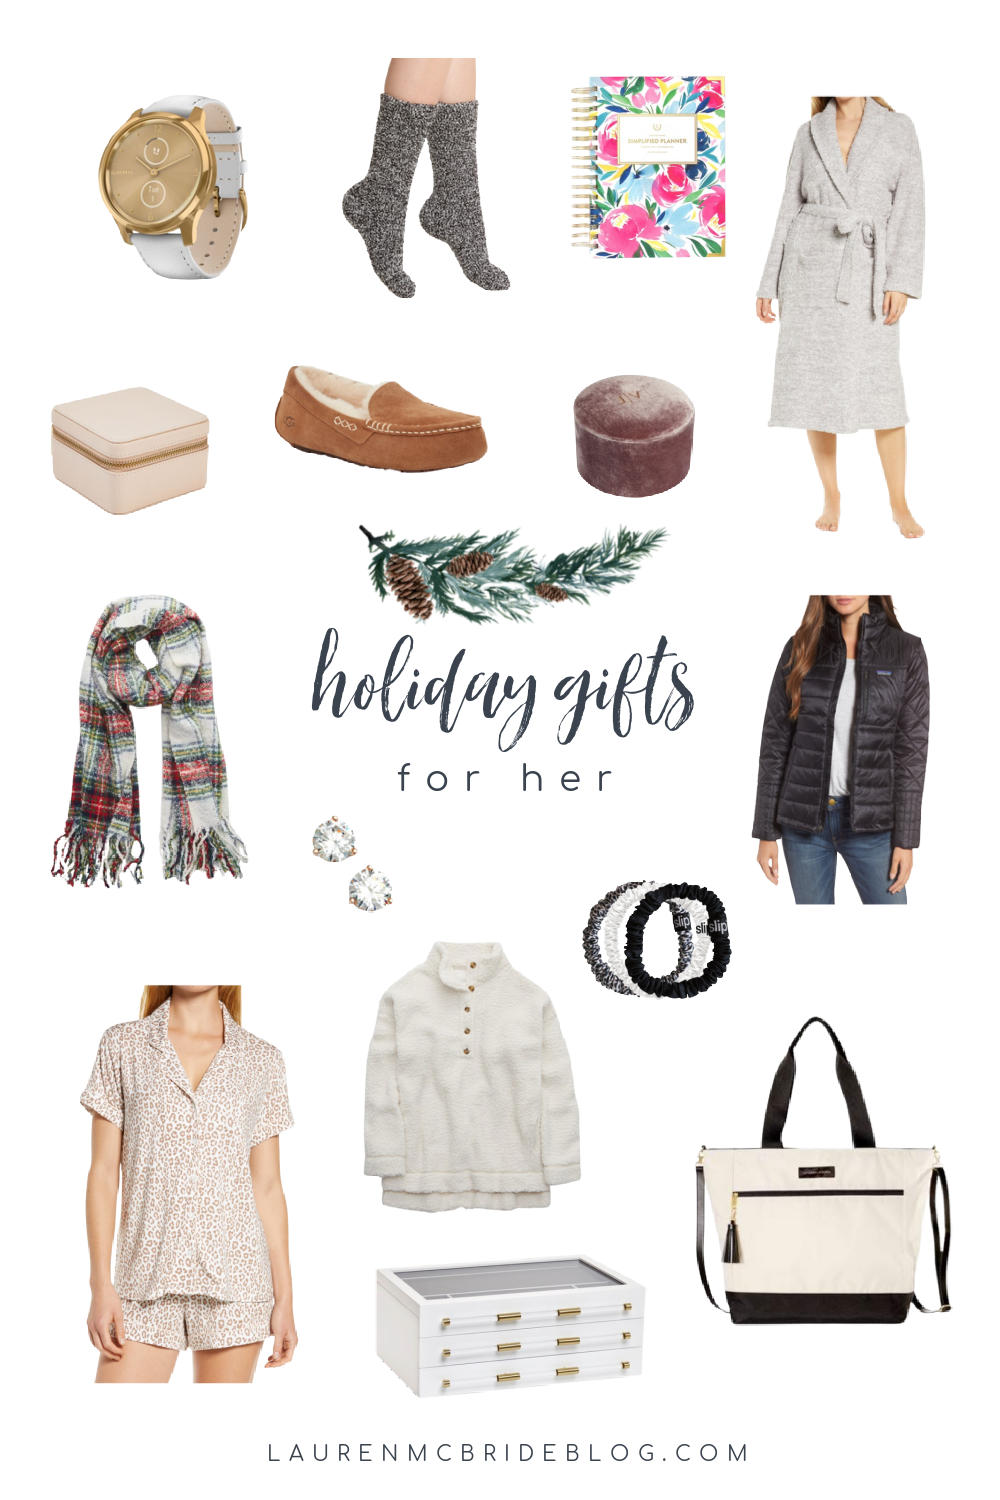 Connecticut life and style blogger Lauren McBride shares holiday gift guides for her for the 2020 holiday season.